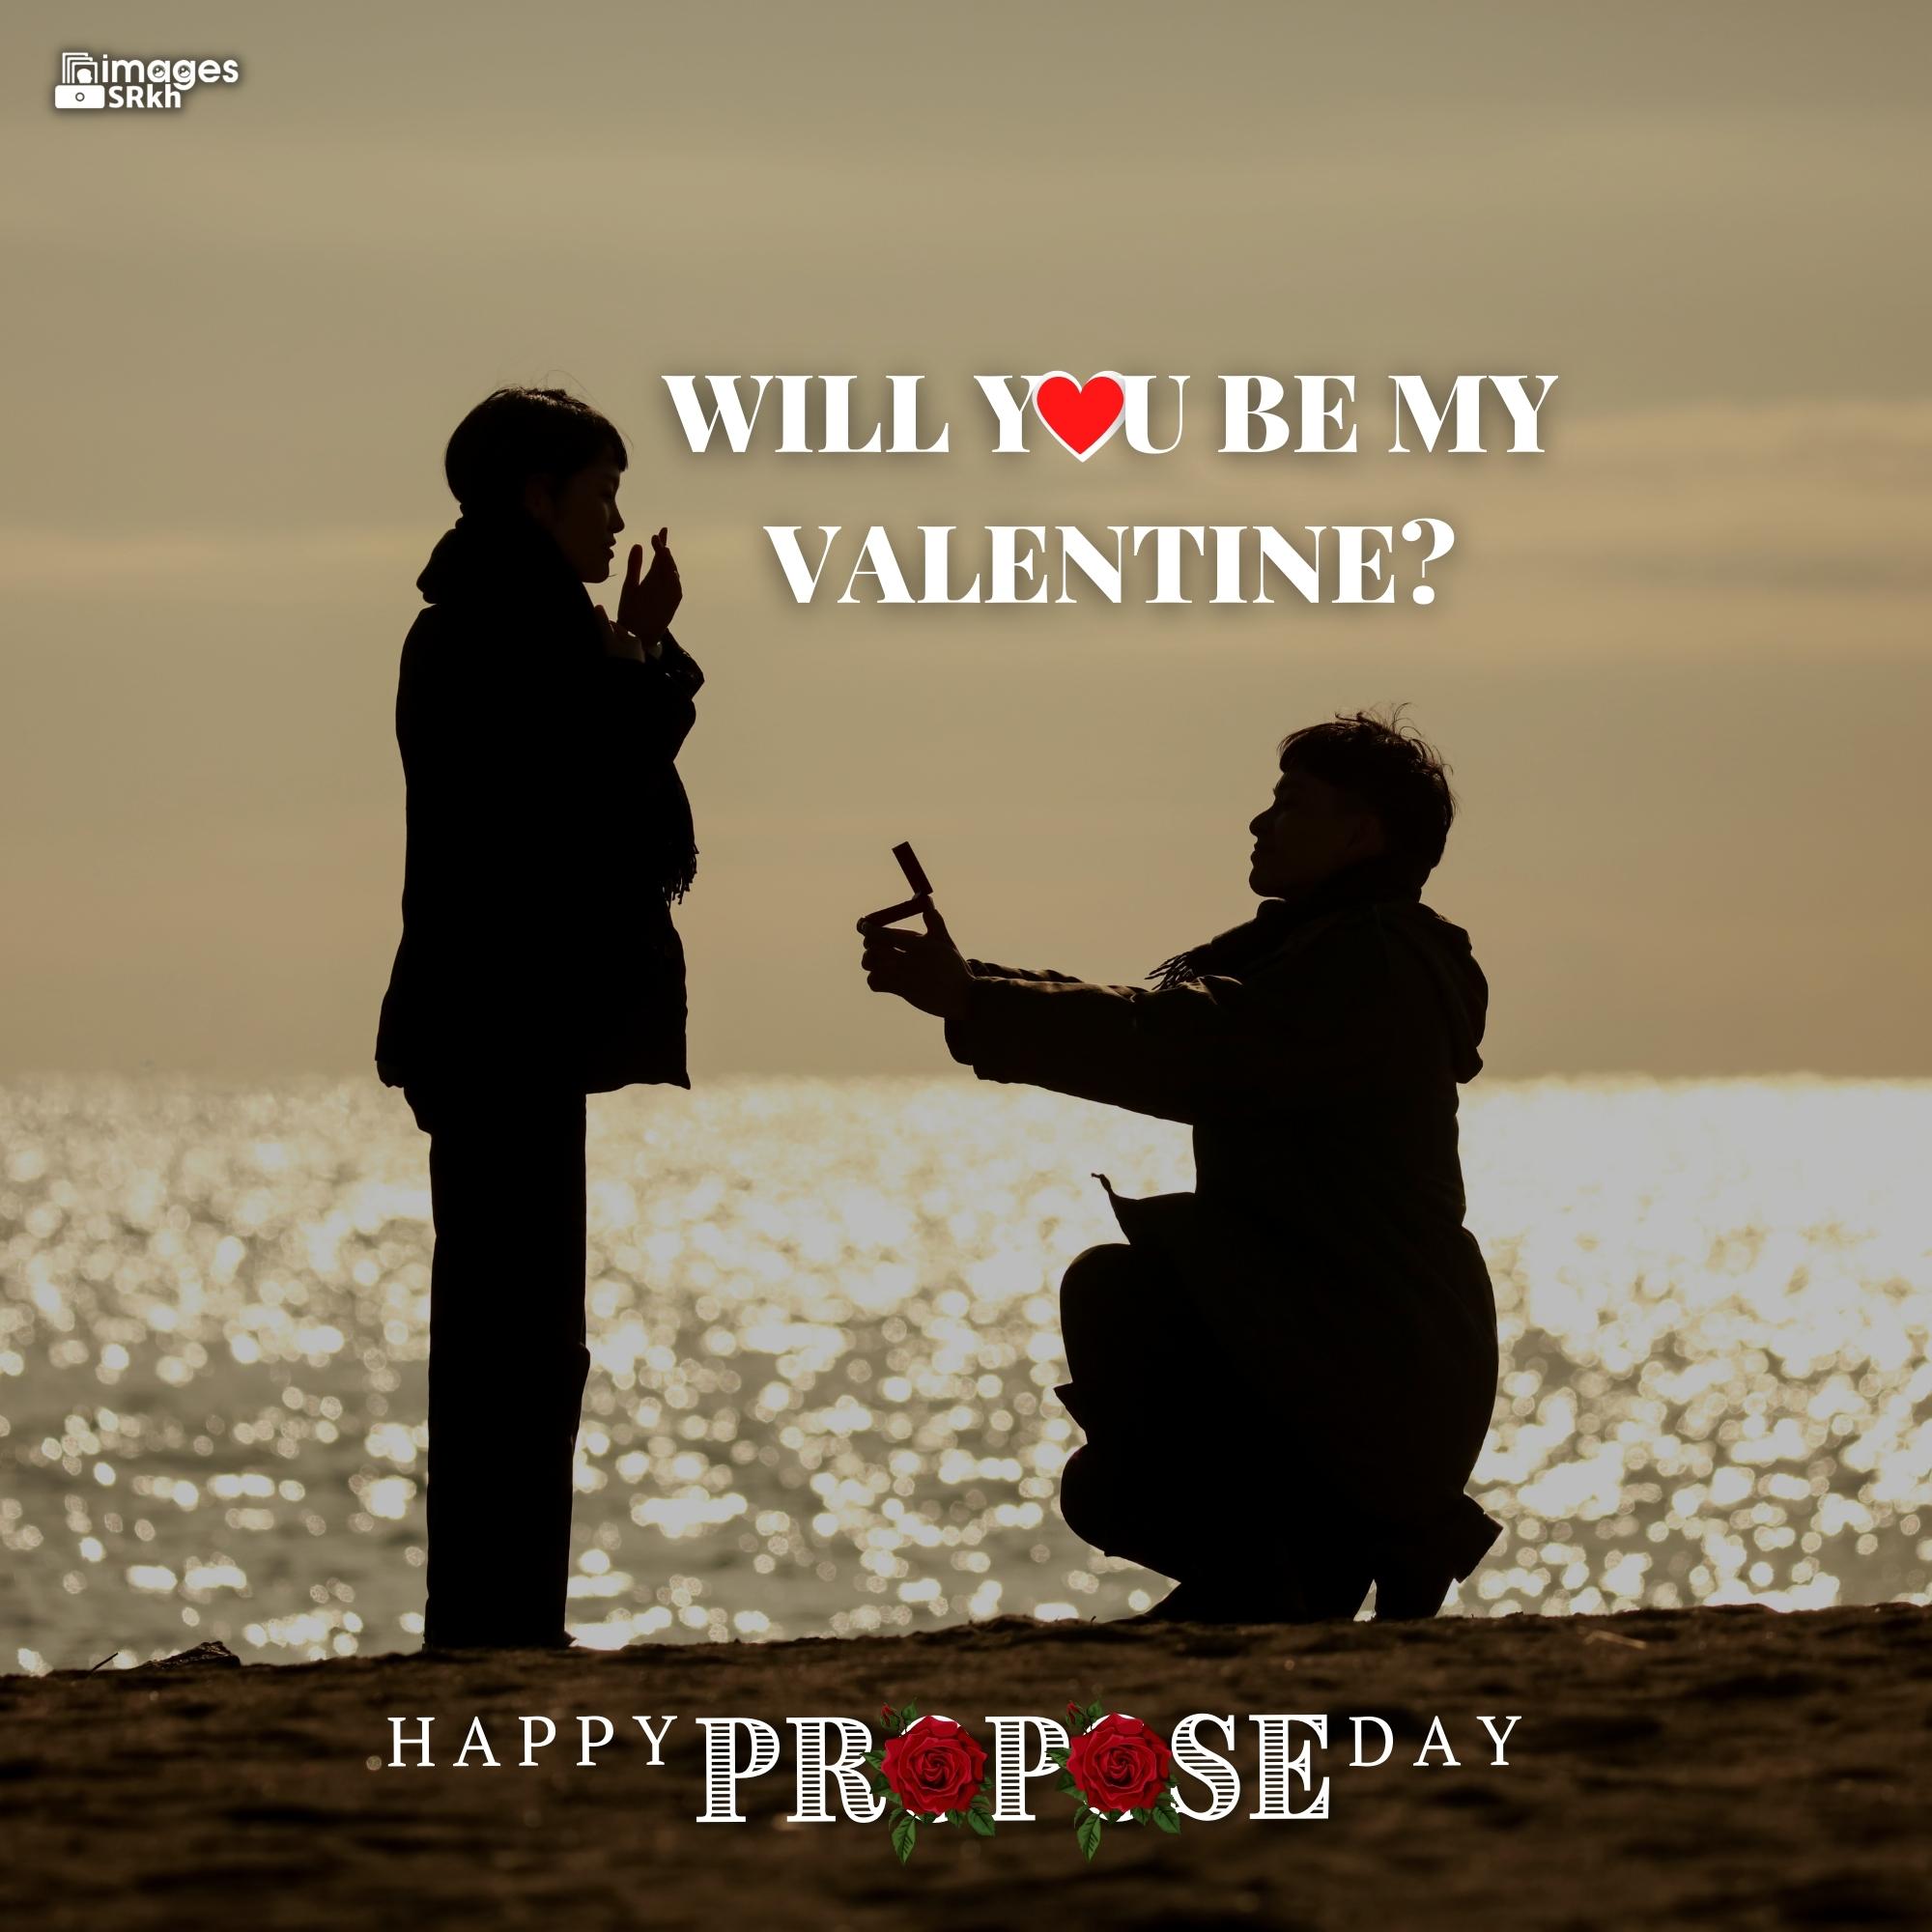 Propose Day Images | 247 | Will You Be My Valentine